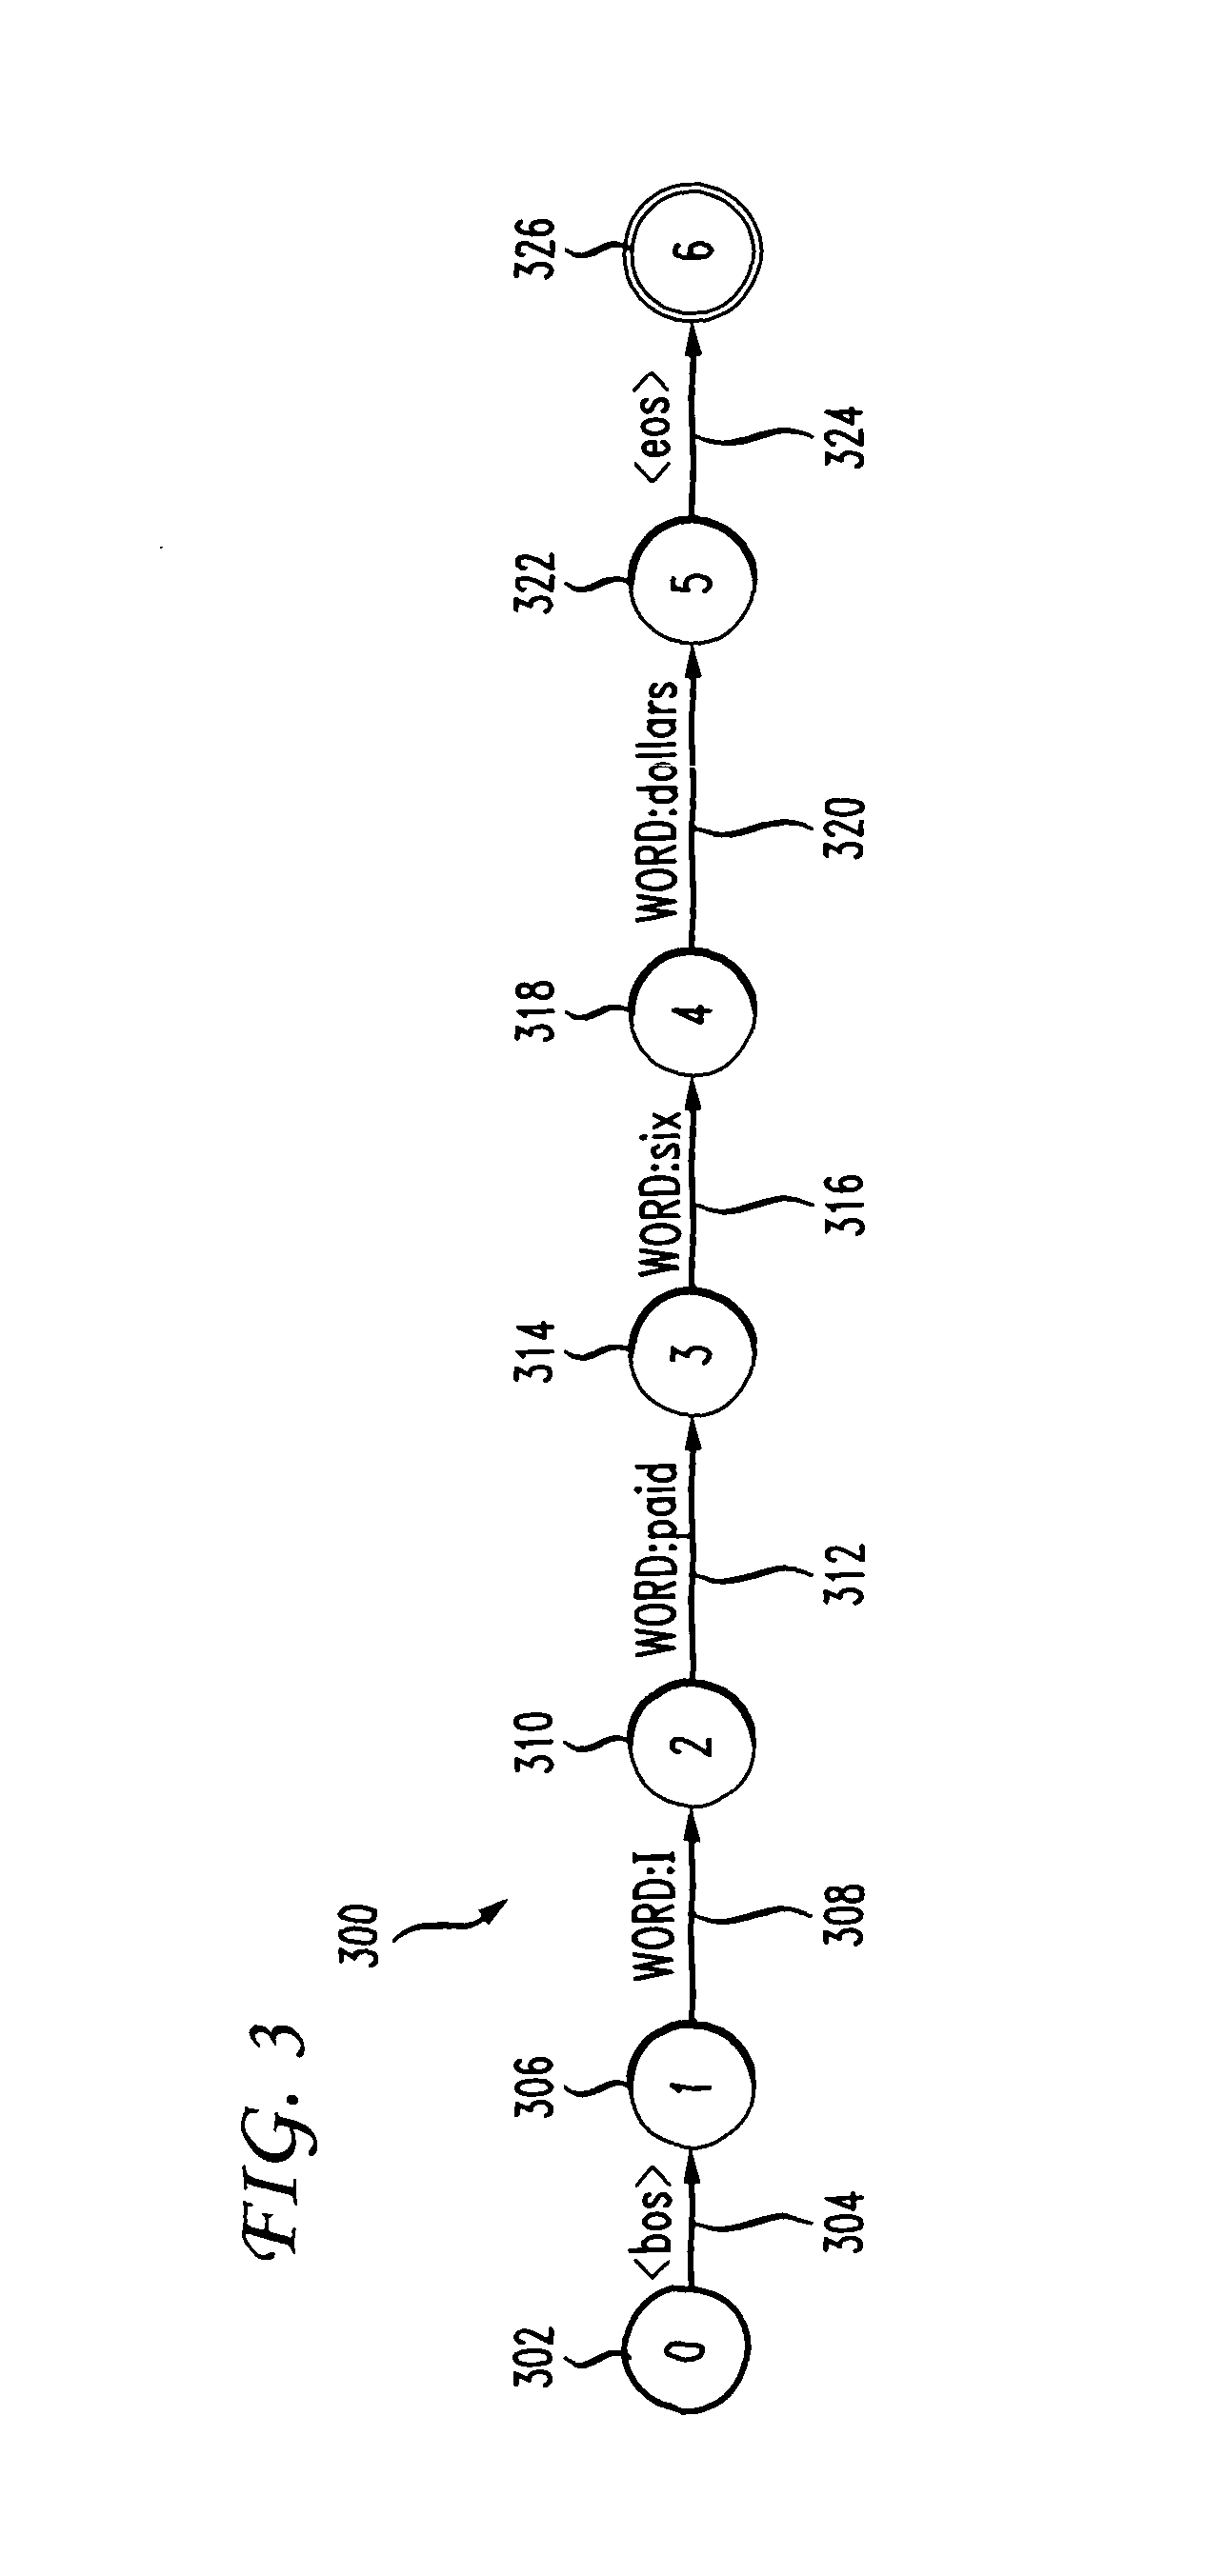 System and method for using semantic and syntactic graphs for utterance classification